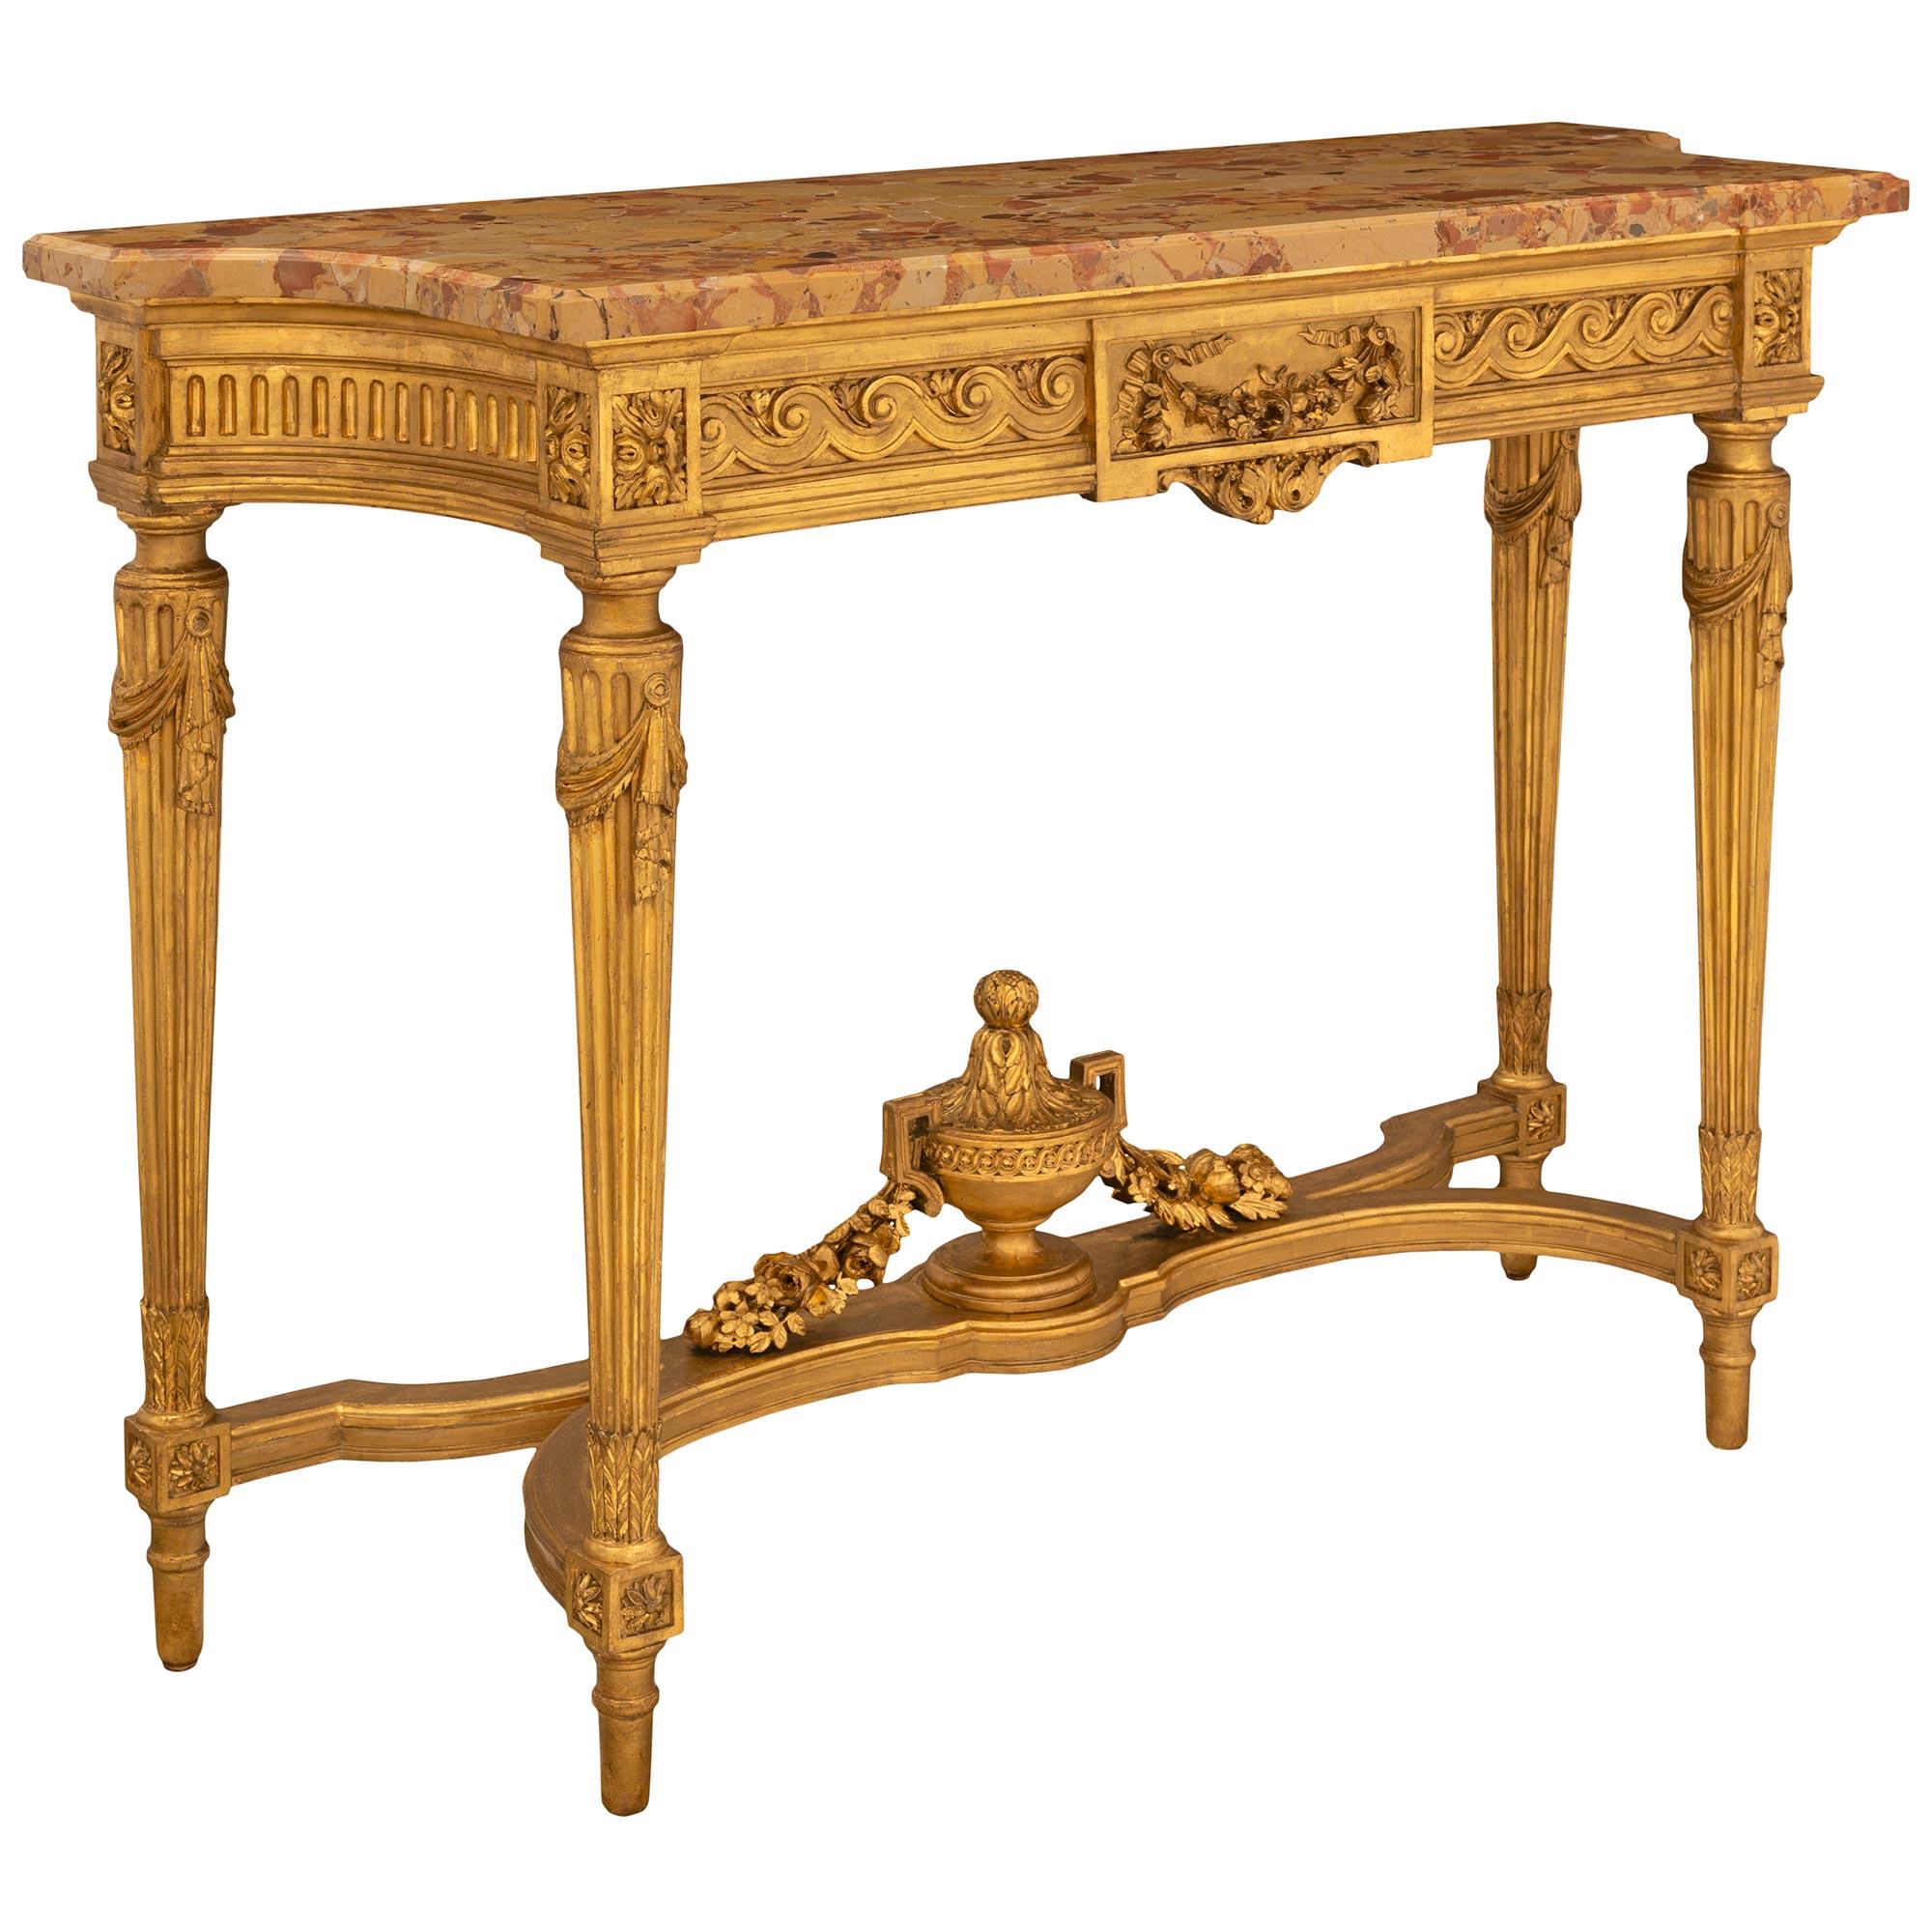 French 19th Century Louis XVI Style Giltwood and Marble Freestanding Console In Good Condition For Sale In West Palm Beach, FL